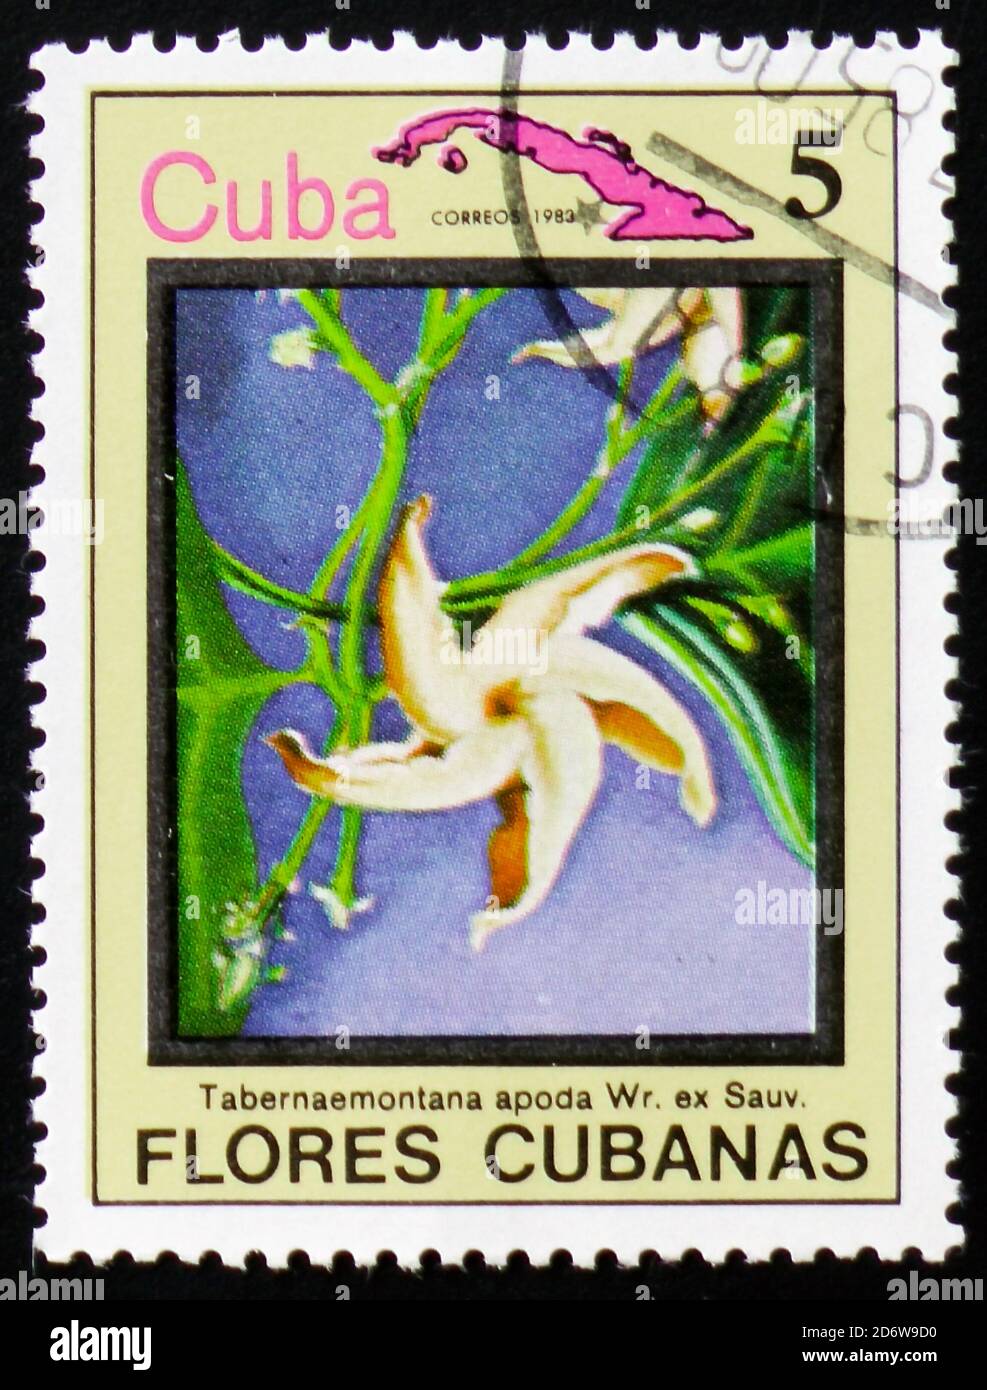 MOSCOW, RUSSIA - FEBRUARY 12, 2017: A stamp printed in Cuba shows Tabernaemontana apoda and map of Cuba, serie Flowers of Cuba, circa 1983 Stock Photo